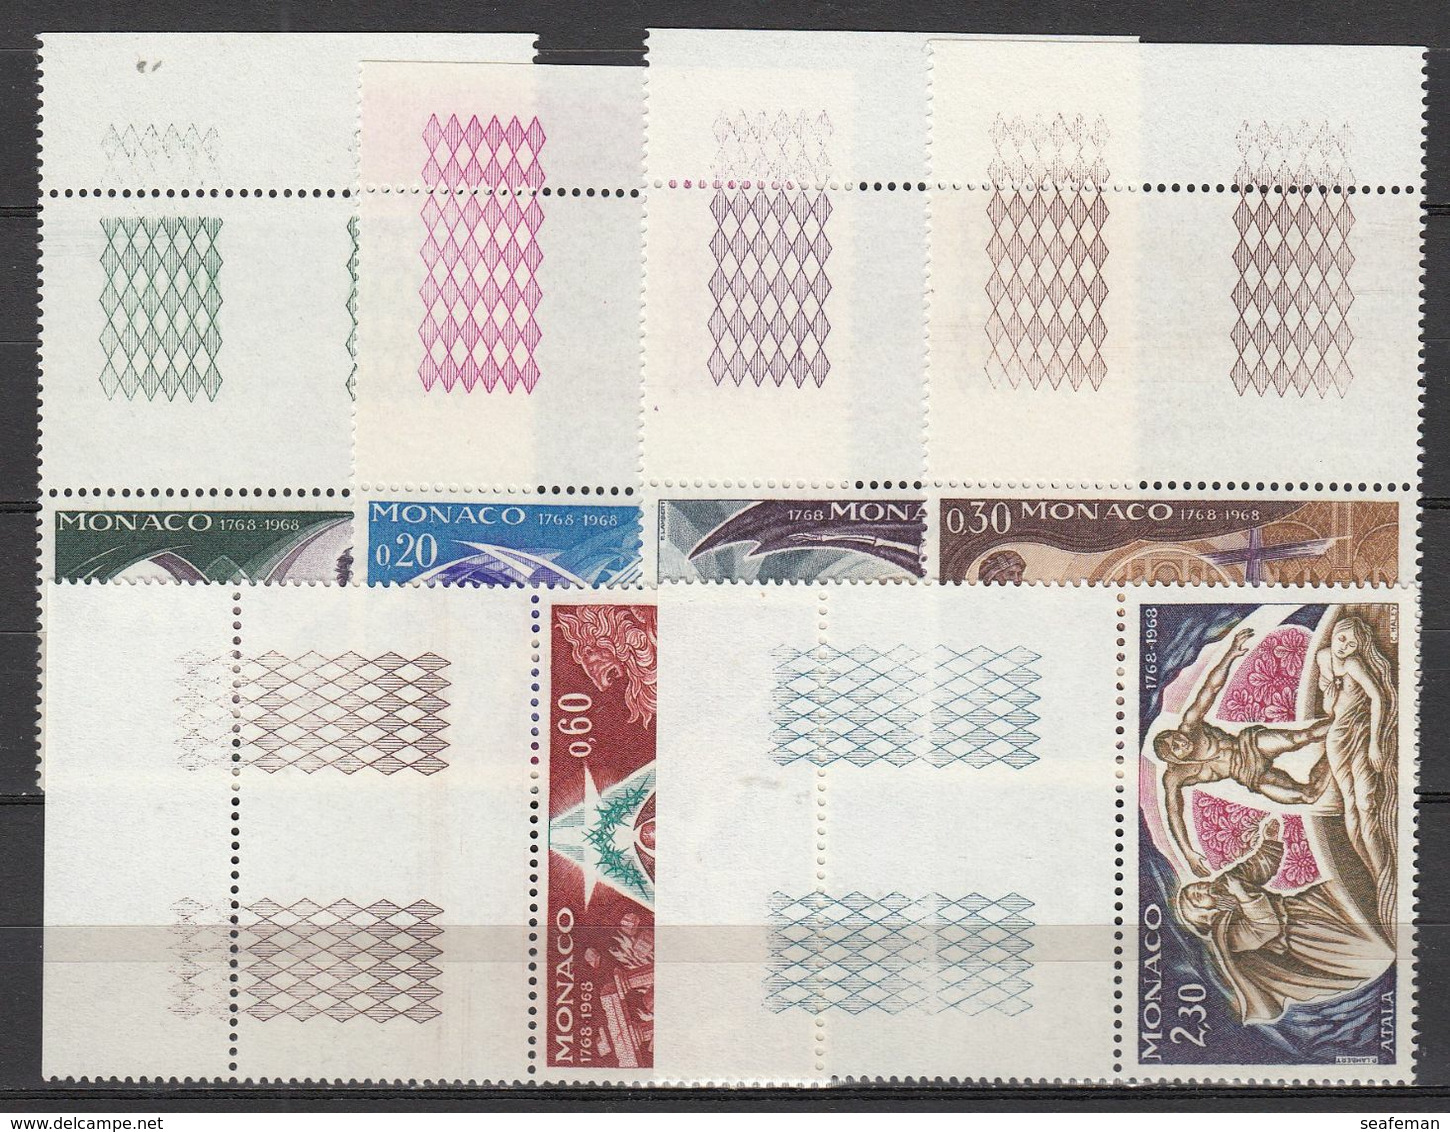 MONACO COLLECTION,many POSTFRISCH,mostly good quality,high cw,used/MNH/MH,see 81 scans [85]